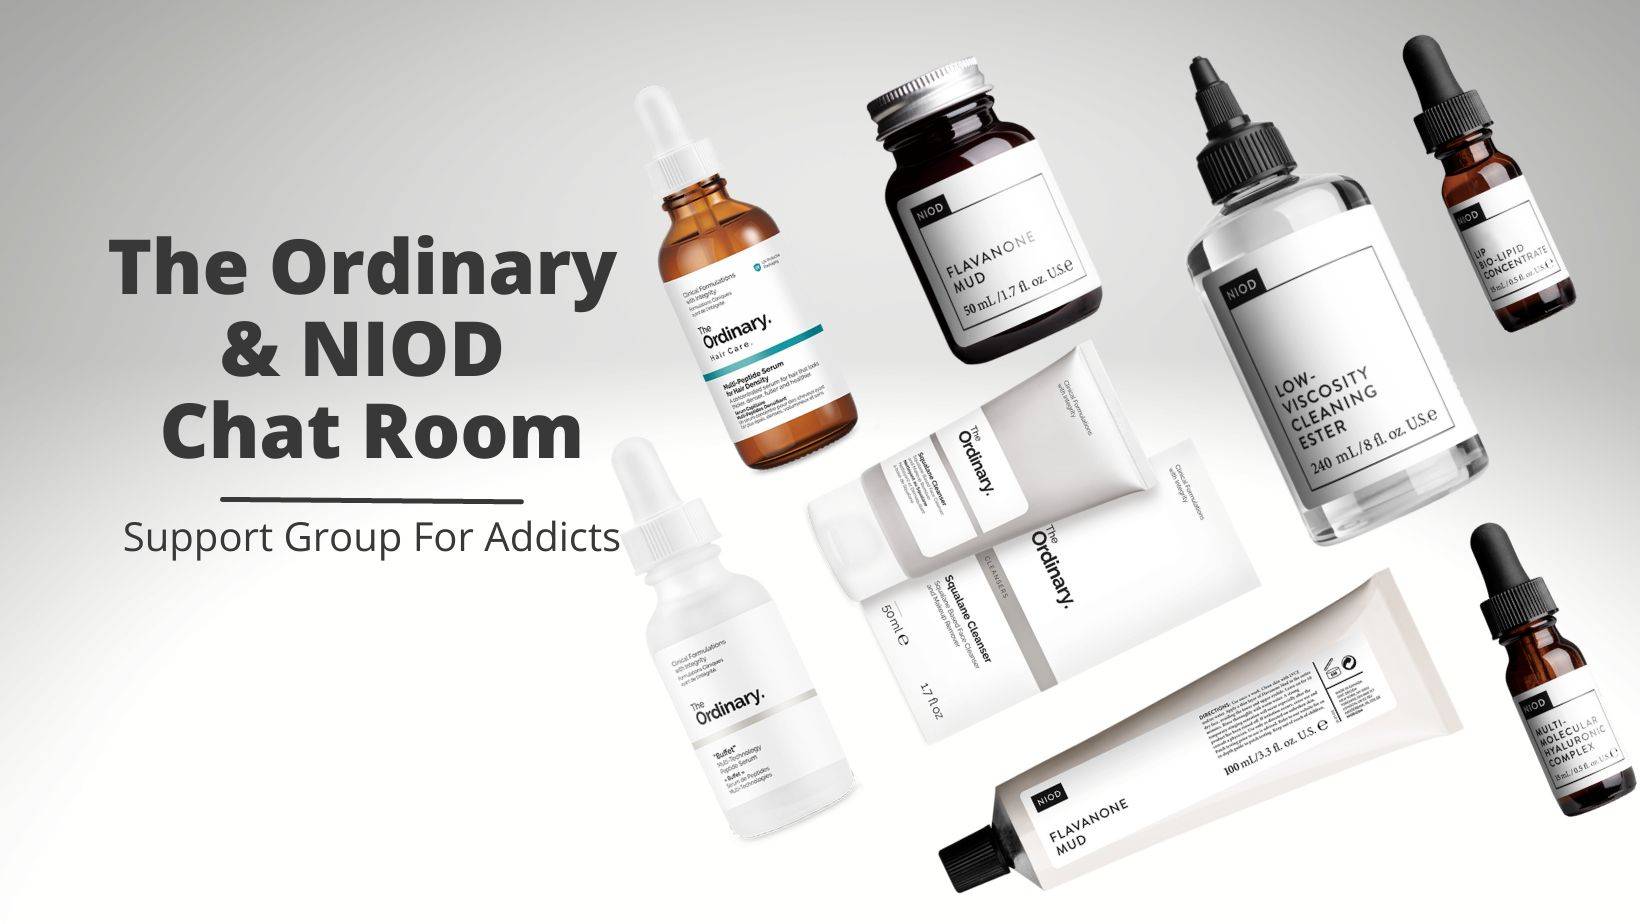 The Ordinary & NIOD Chat Room